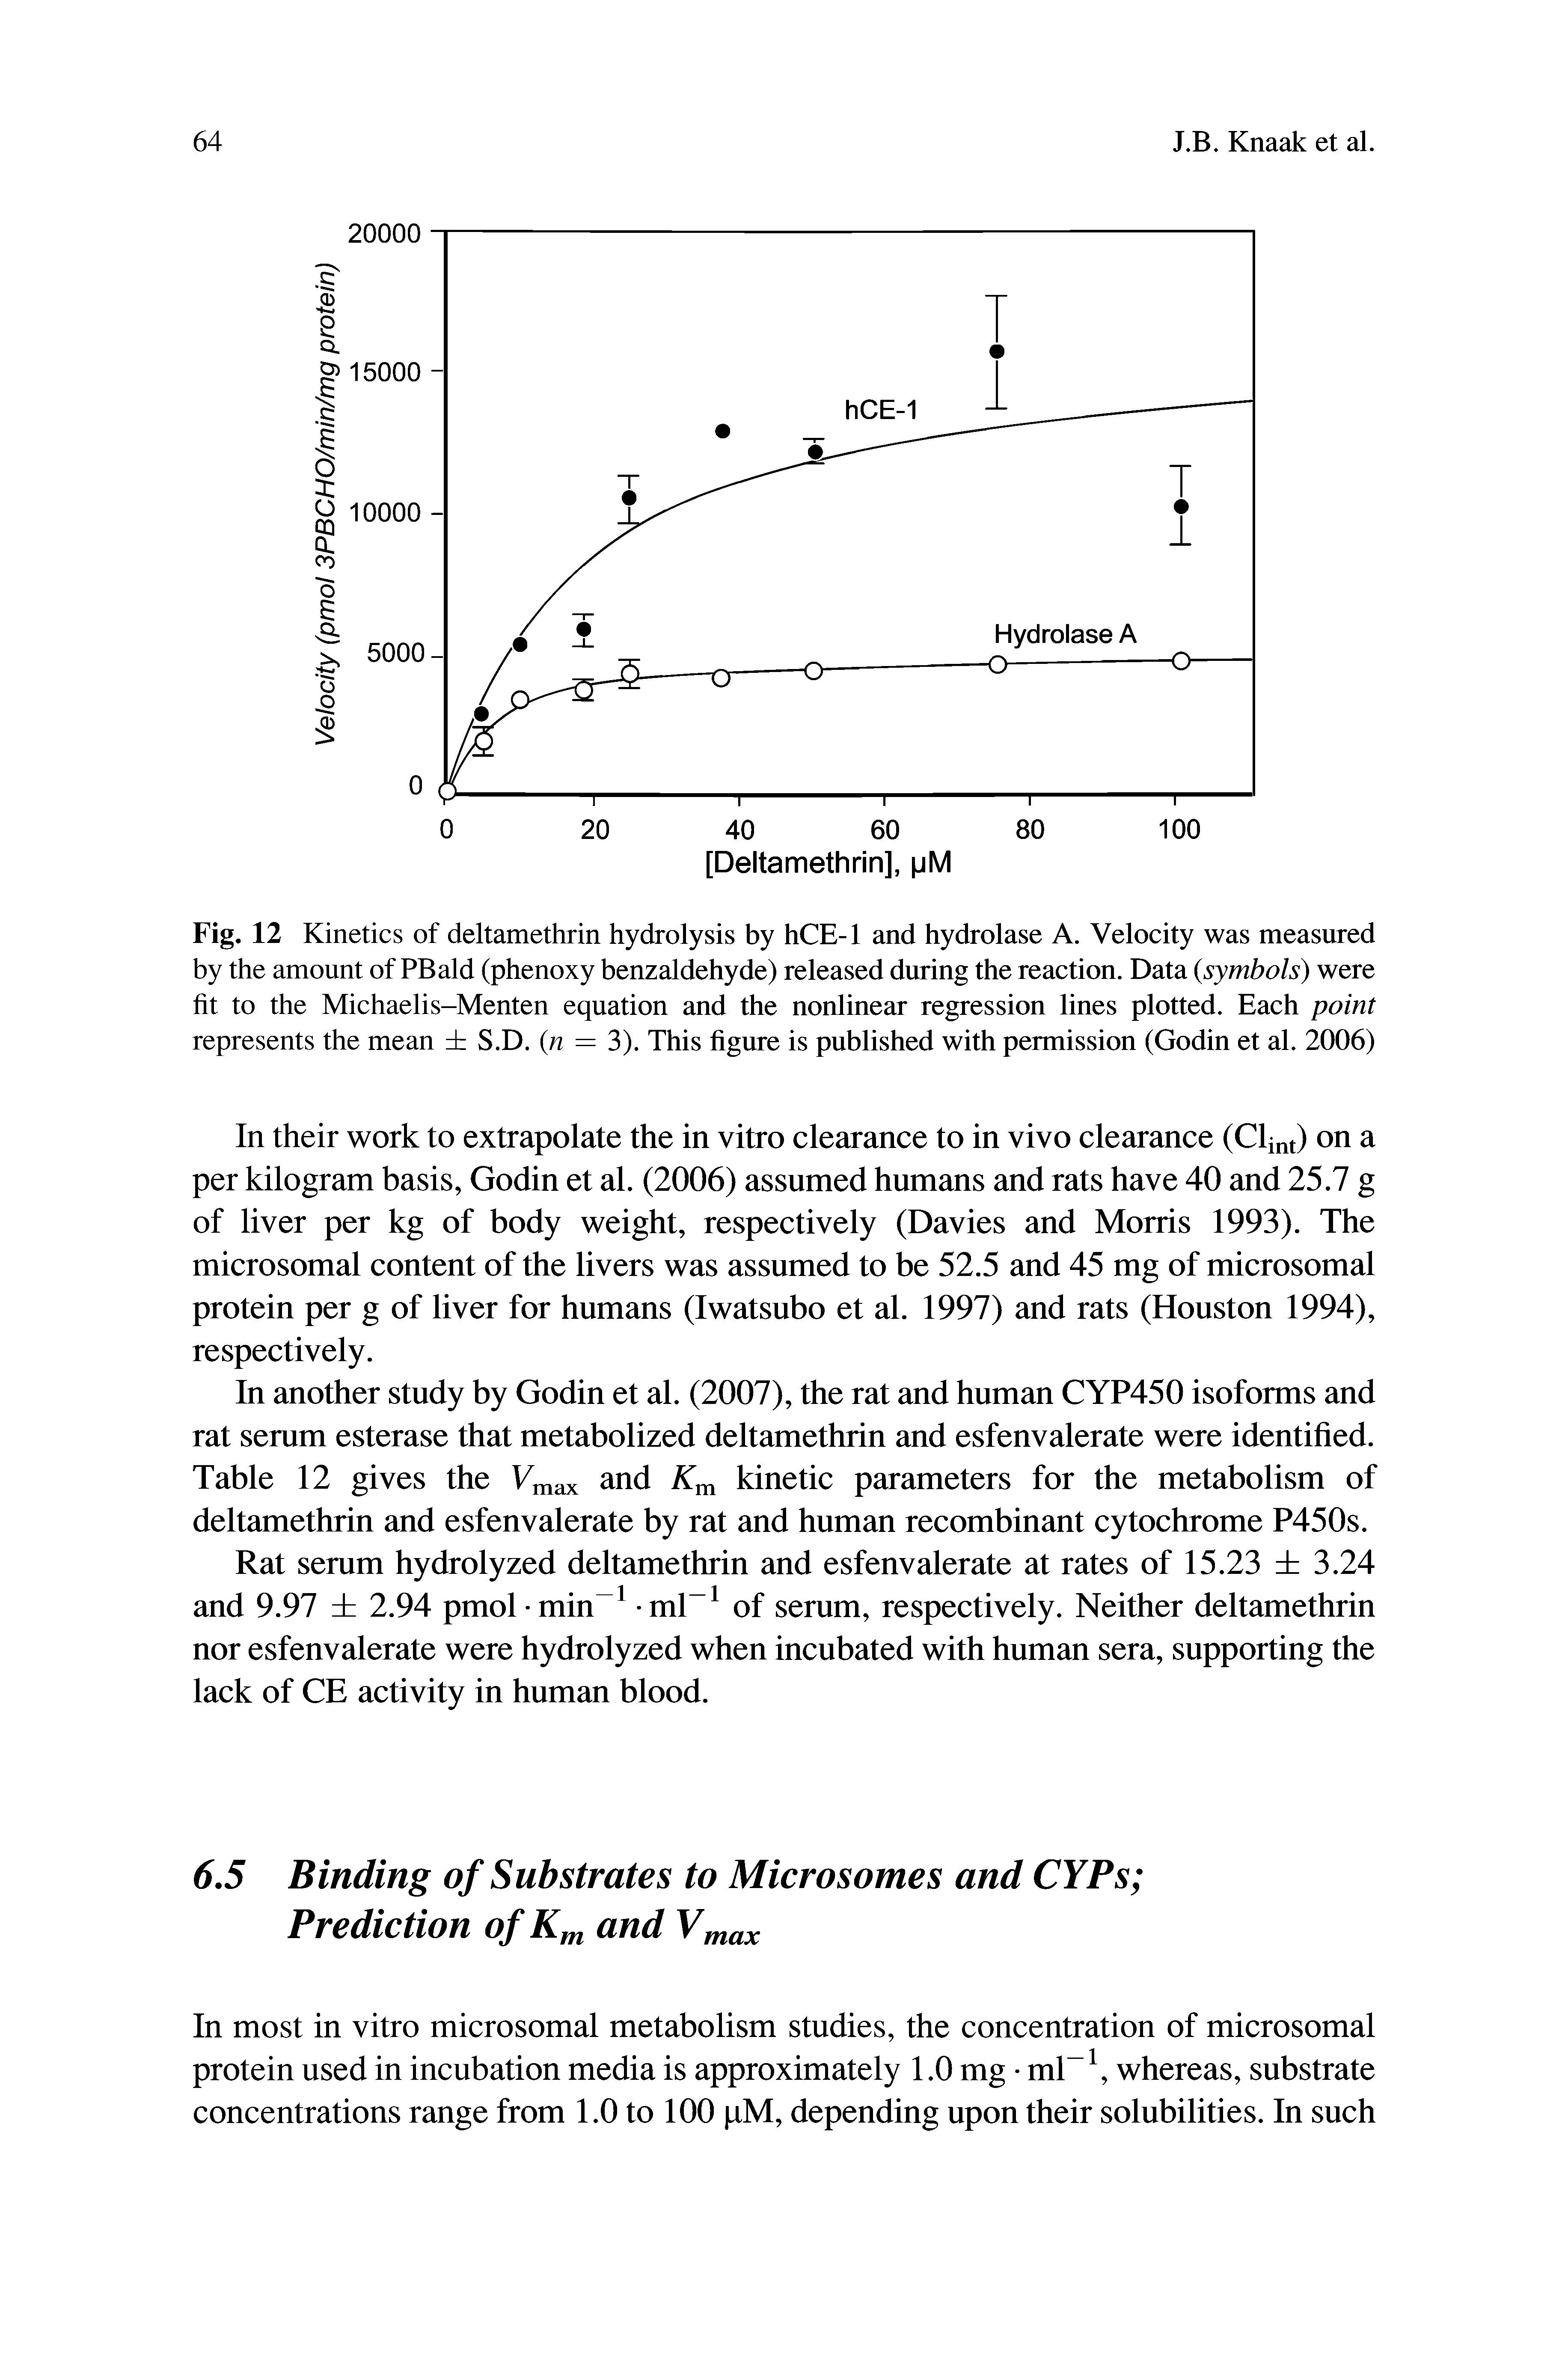 Fig. 12 Kinetics of deltamethrin hydrolysis by hCE-1 and hydrolase A. Velocity was measured by the amount of PBald (phenoxy benzaldehyde) released during the reaction. Data symbols) were fit to the Michaelis-Menten equation and the nonlinear regression lines plotted. Each point represents the mean S.D. n = 3). This figure is published with permission (Godin et al. 2006)...